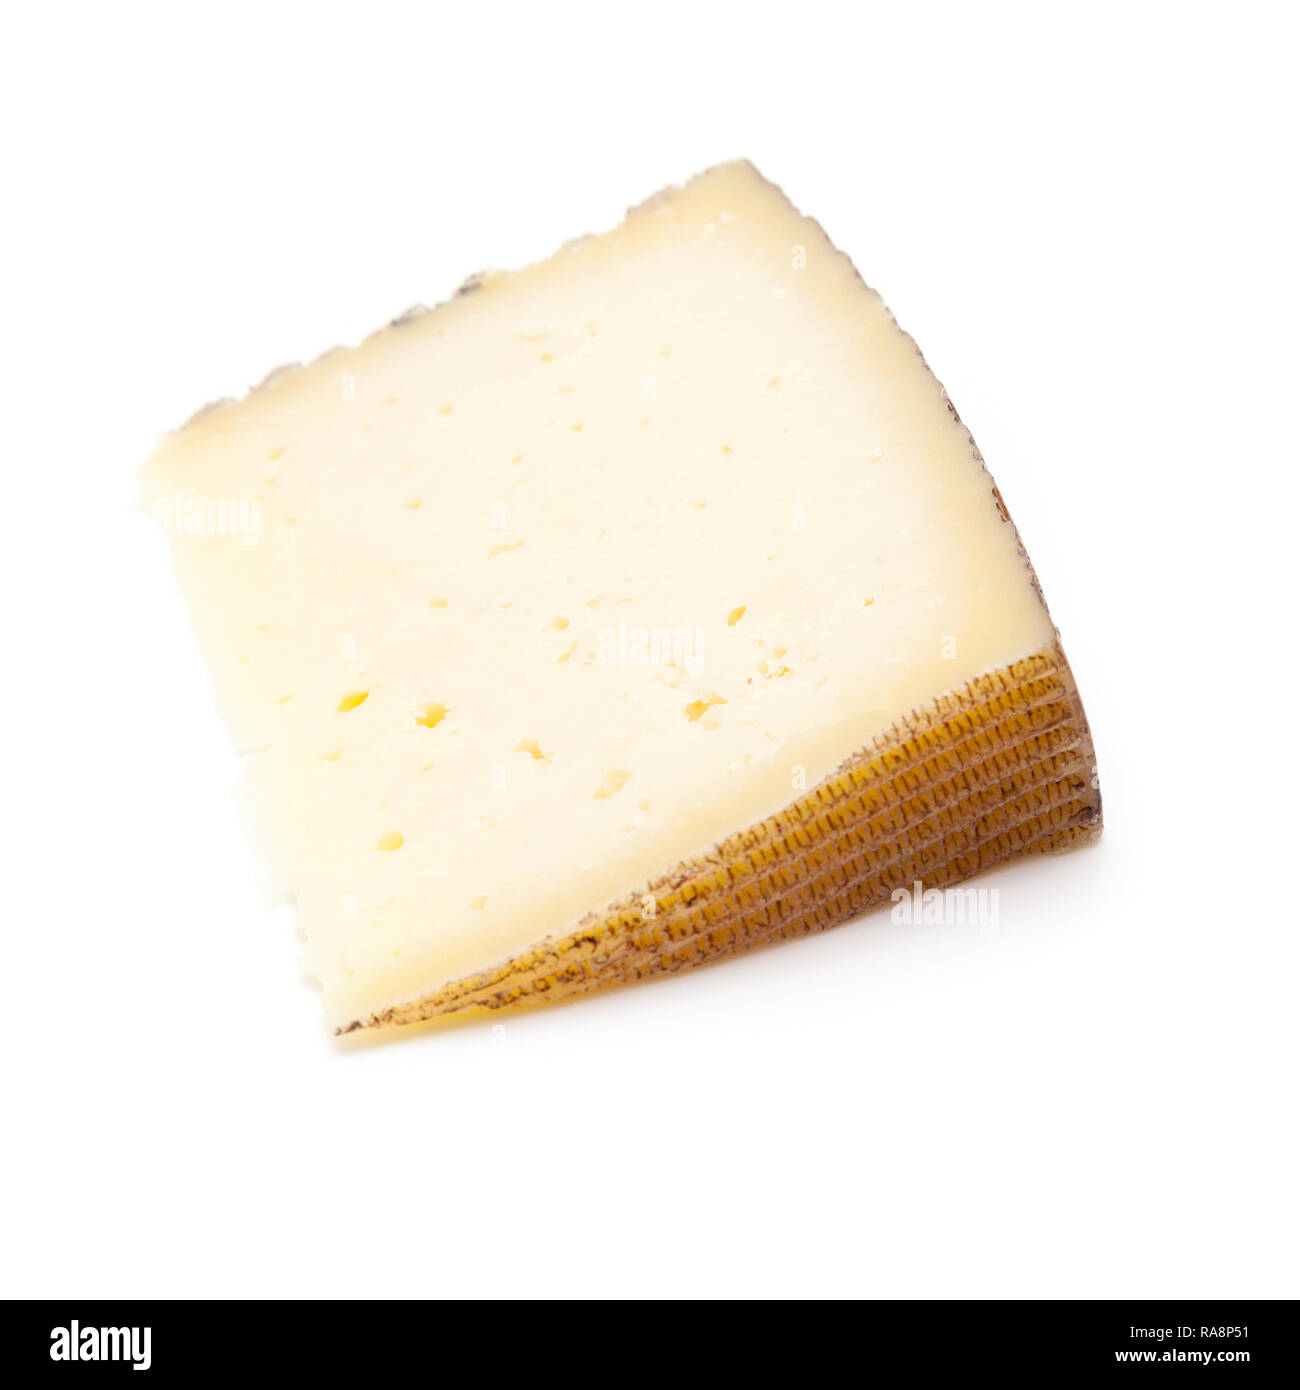 Spanish Manchego cheese made from sheep's milk it has a firm and creamy texture, isolated on a white studio background. Stock Photo